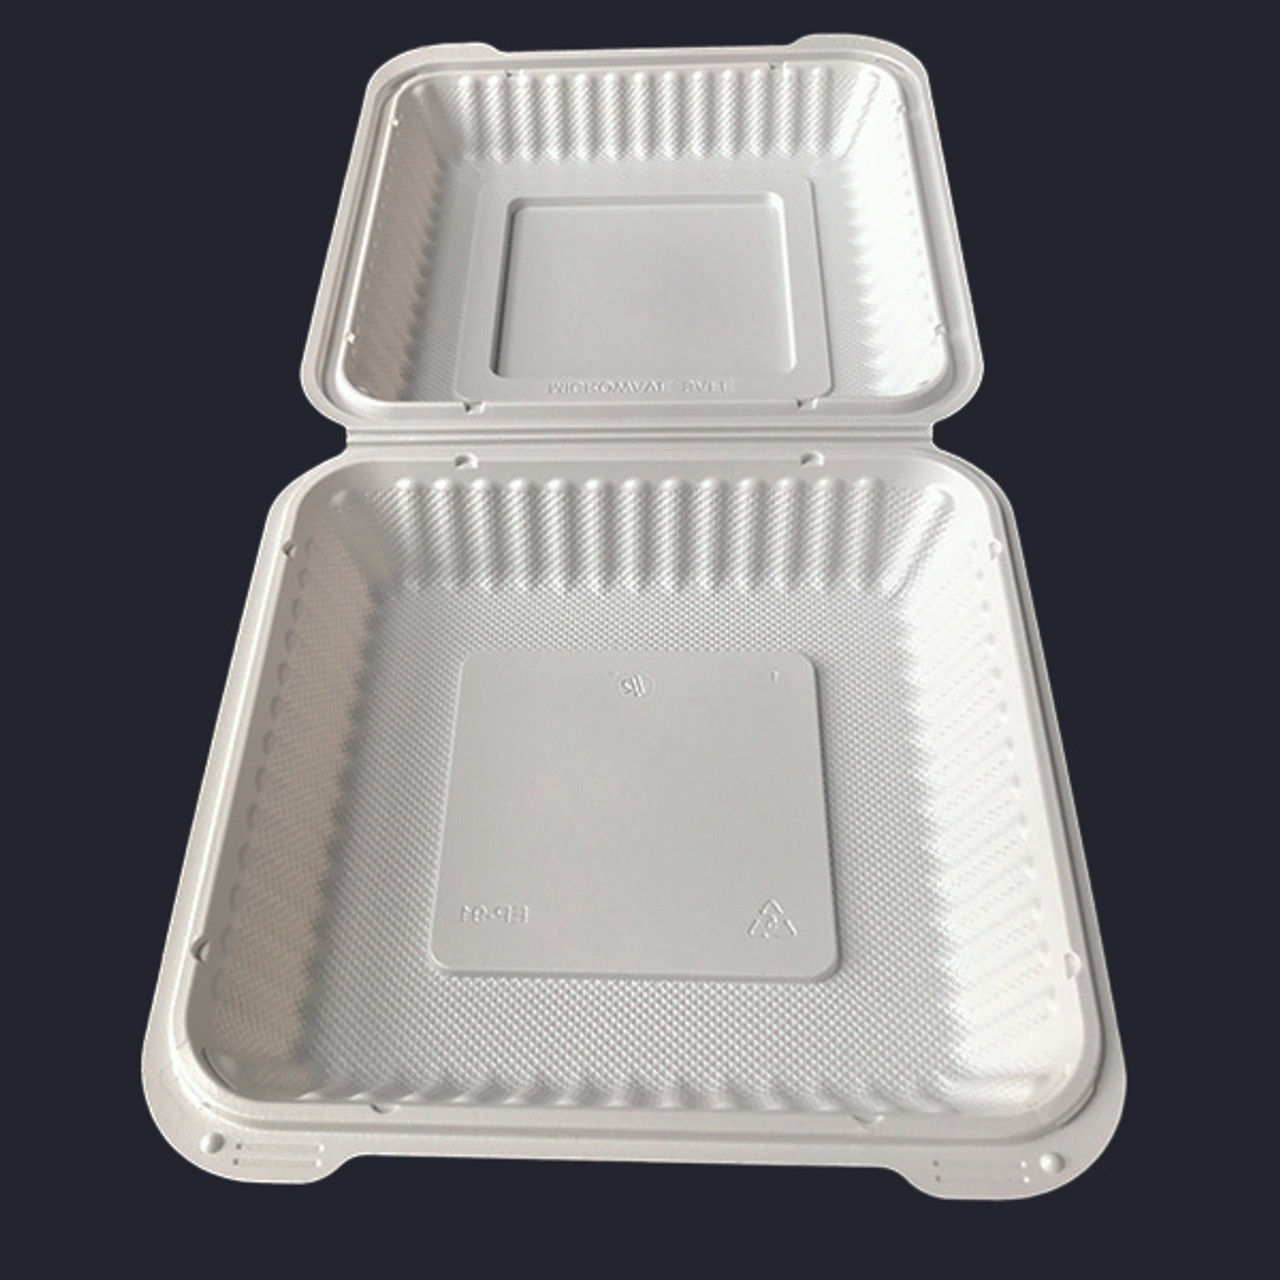 Medium White Takeout Boxes - 9x6 Mineral Filled Hinged Containers